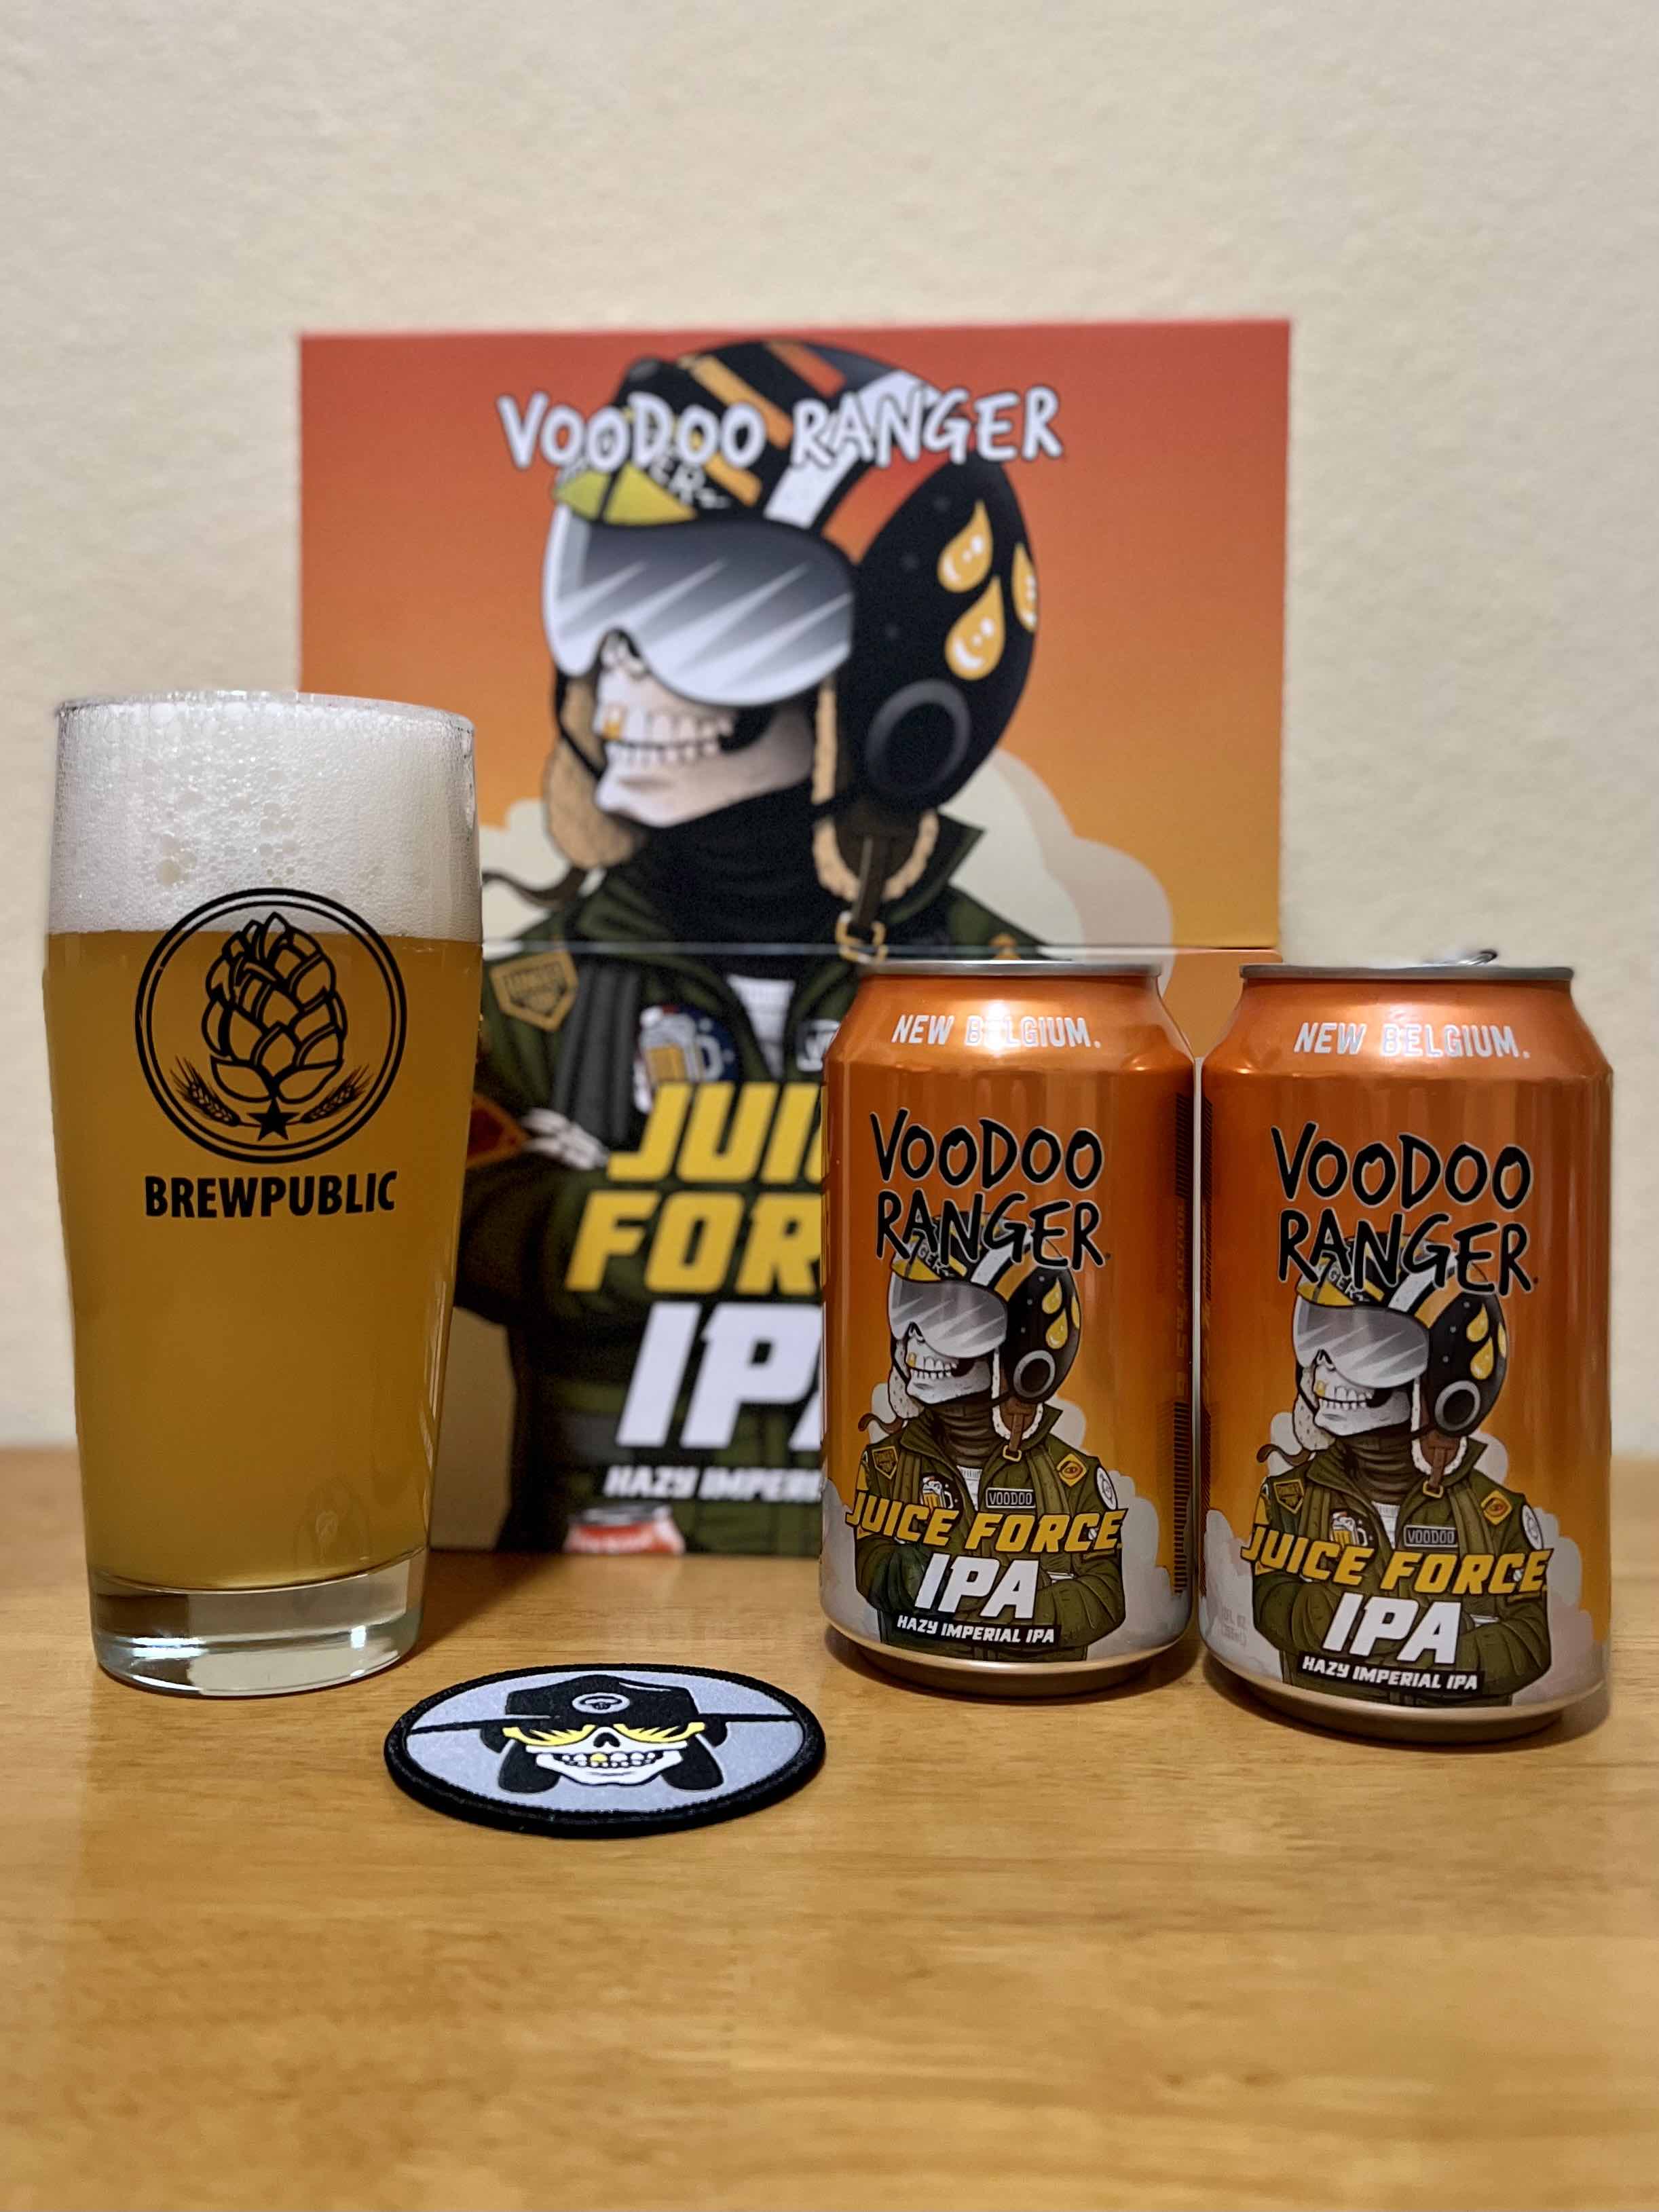 The new Voodoo Ranger Juice Force IPA from New Belgium Brewing is one bold and flavorful IPA at 9.5% ABV!